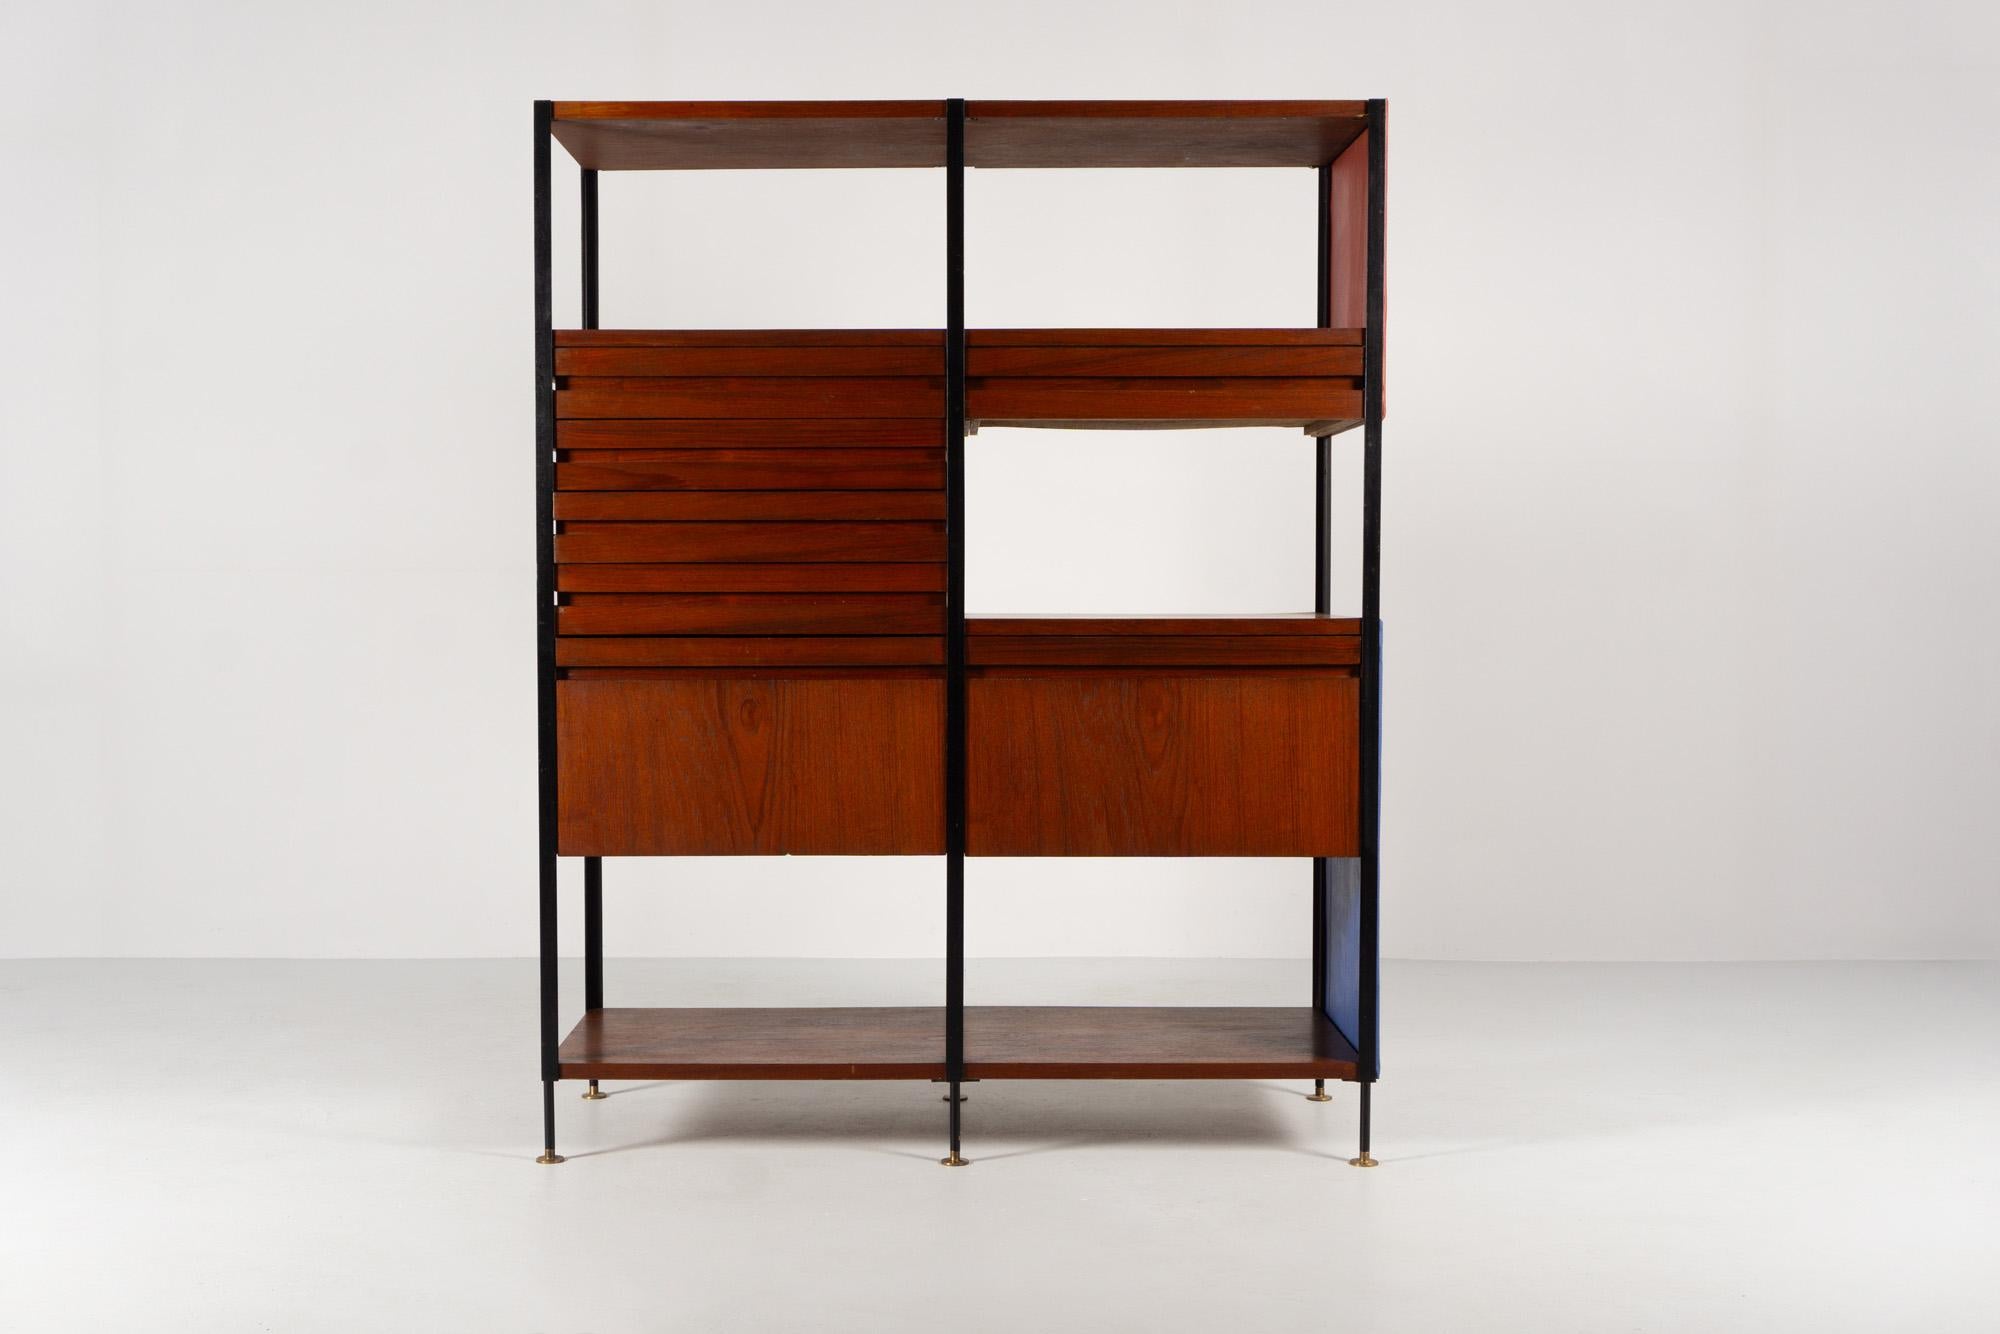 This rare and very functional shelf with drawers and compartments made of teak 
is in the style of the time. Similarities with the design of Charles Eames and Osvaldo Borsani are recognisable.
The design impresses with its light, elegant